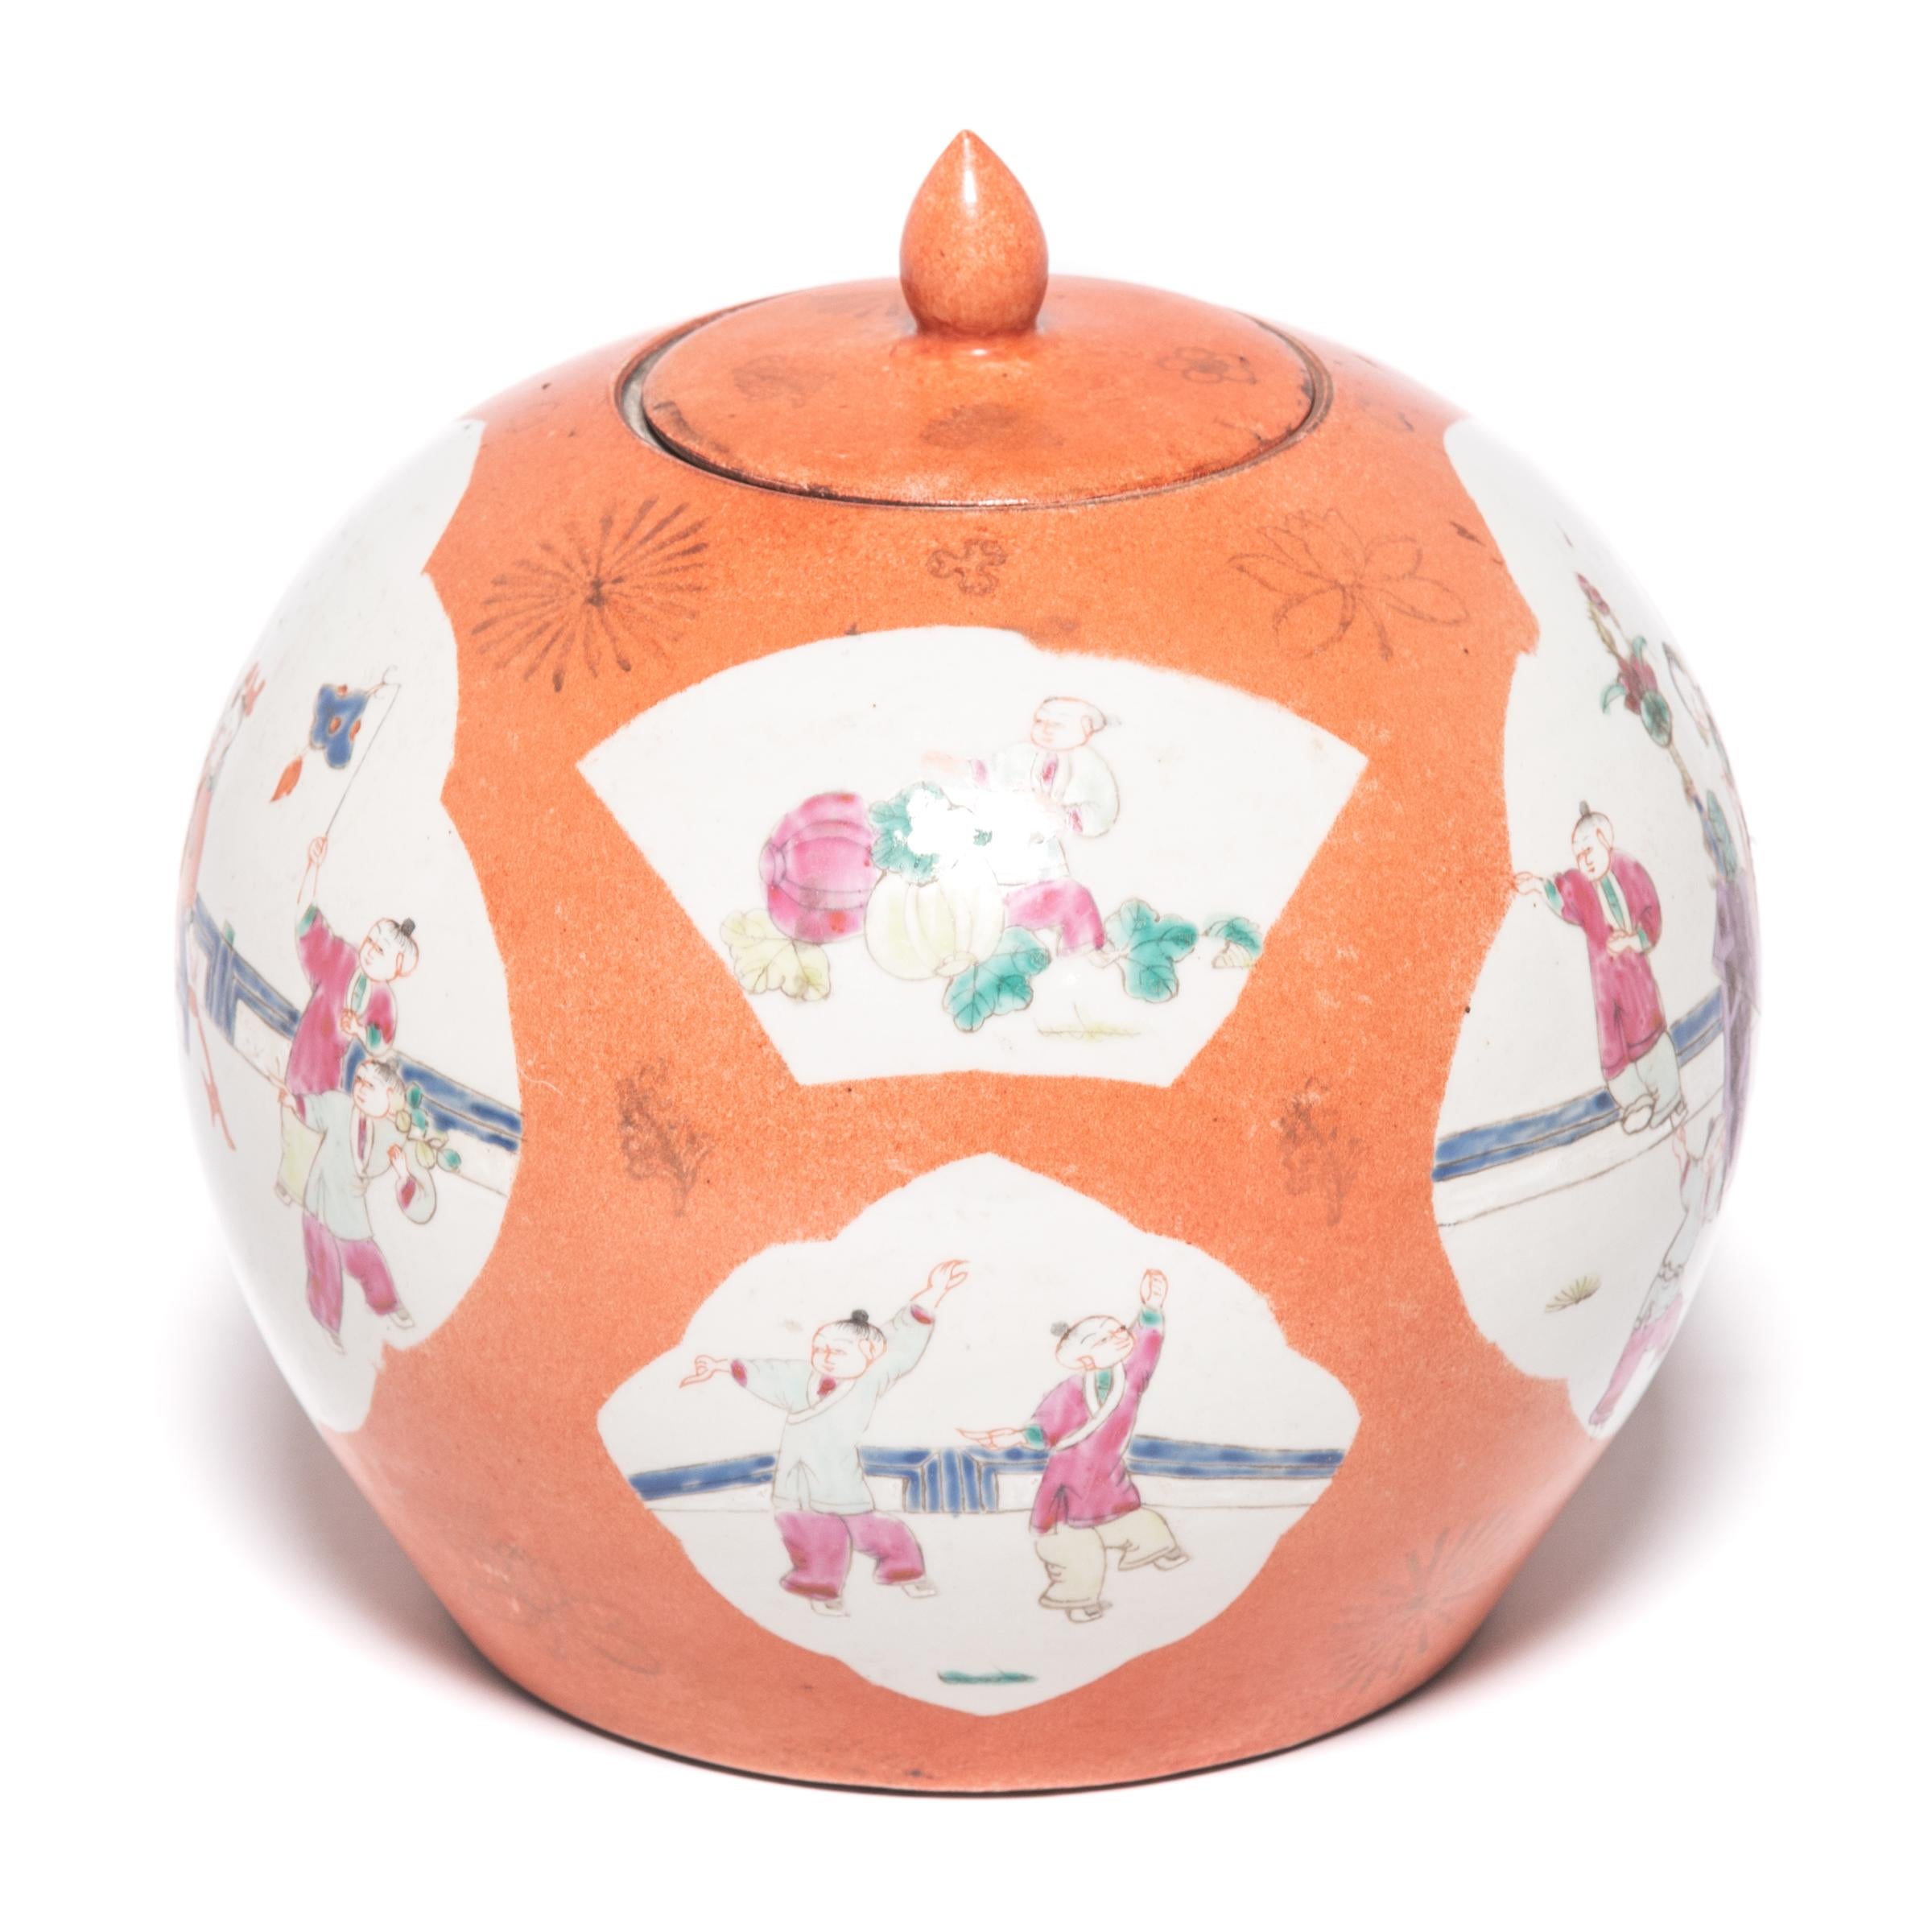 White cartouches open on this vibrant vase’s persimmon orange field like parting clouds, revealing scenes of young boys practicing martial arts. Perhaps commissioned for newlyweds, the multitude of children on this early 20th-century vase symbolize